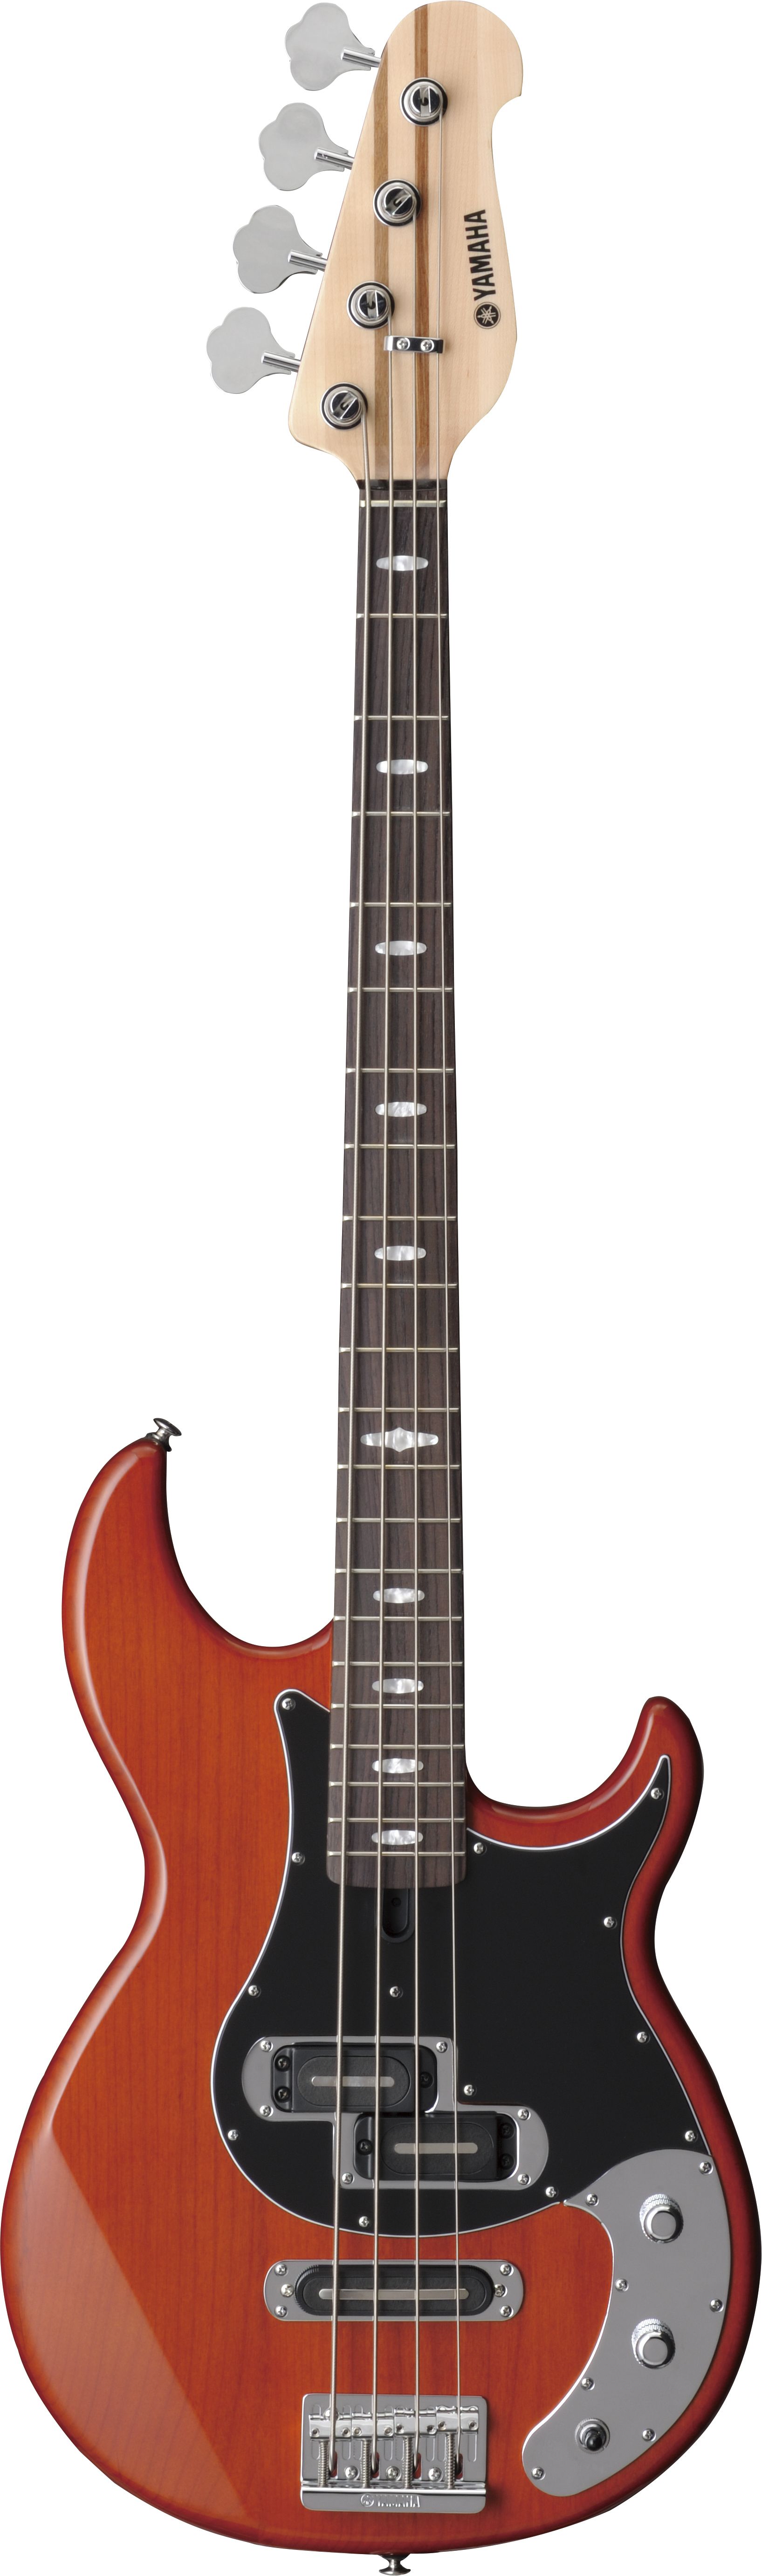 BB - Overview - Electric Basses - Guitars, Basses & Amps - Musical